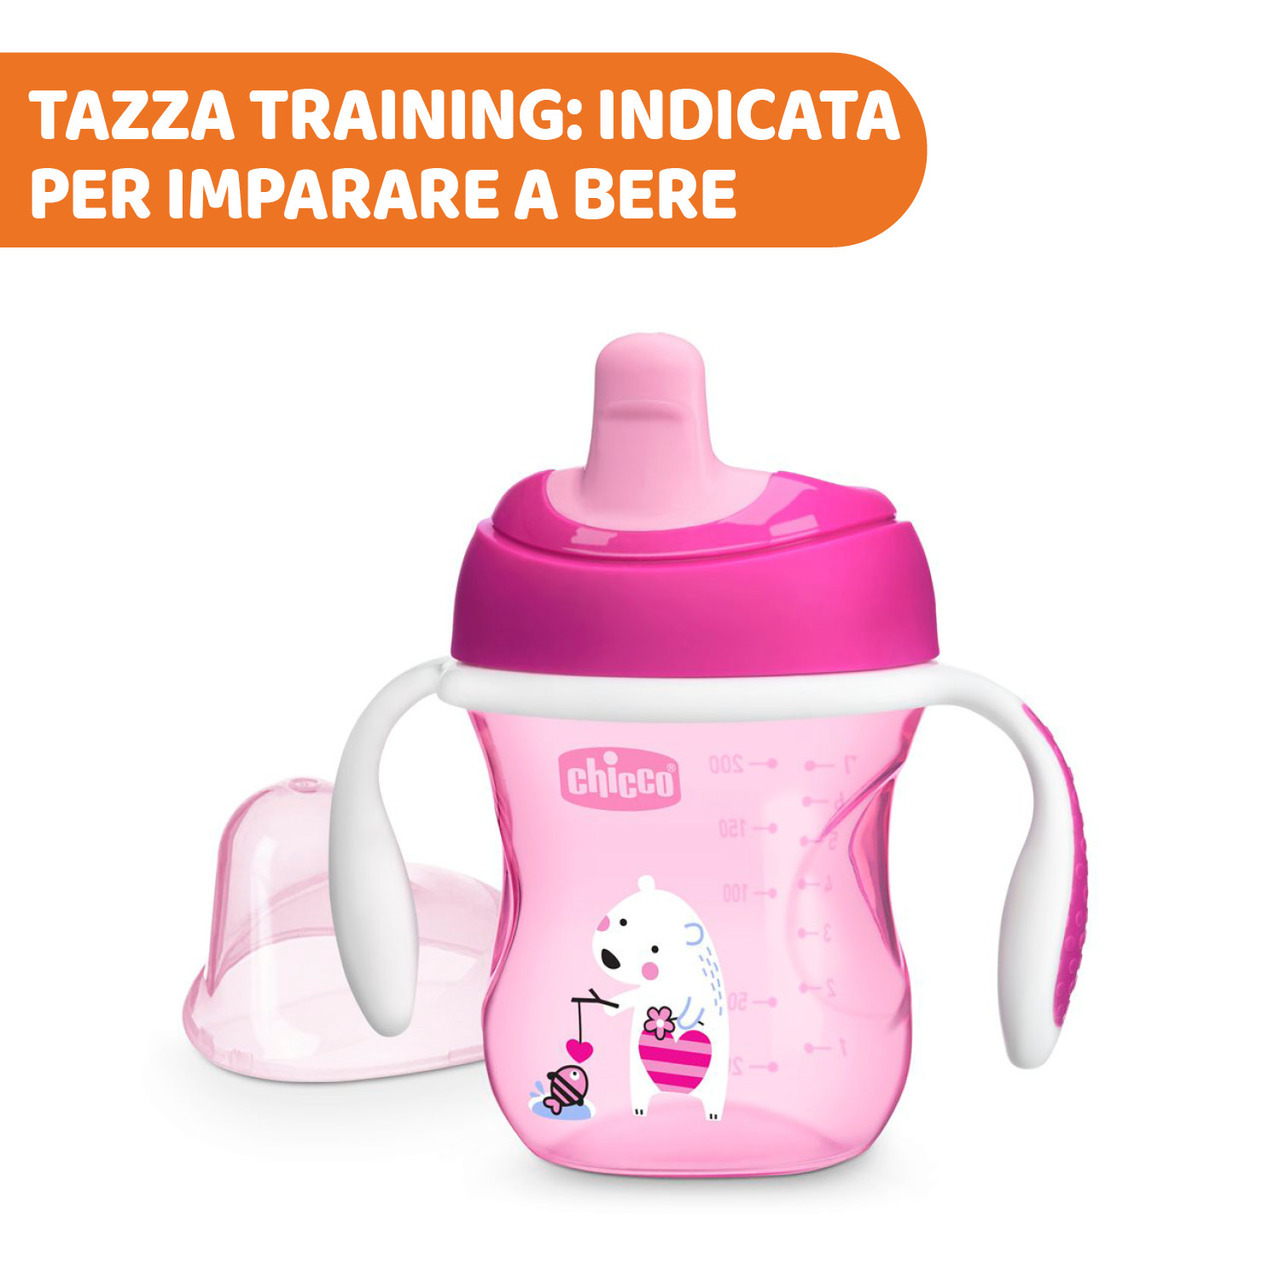 Chicco set pappa 6m+ rosa - Chicco